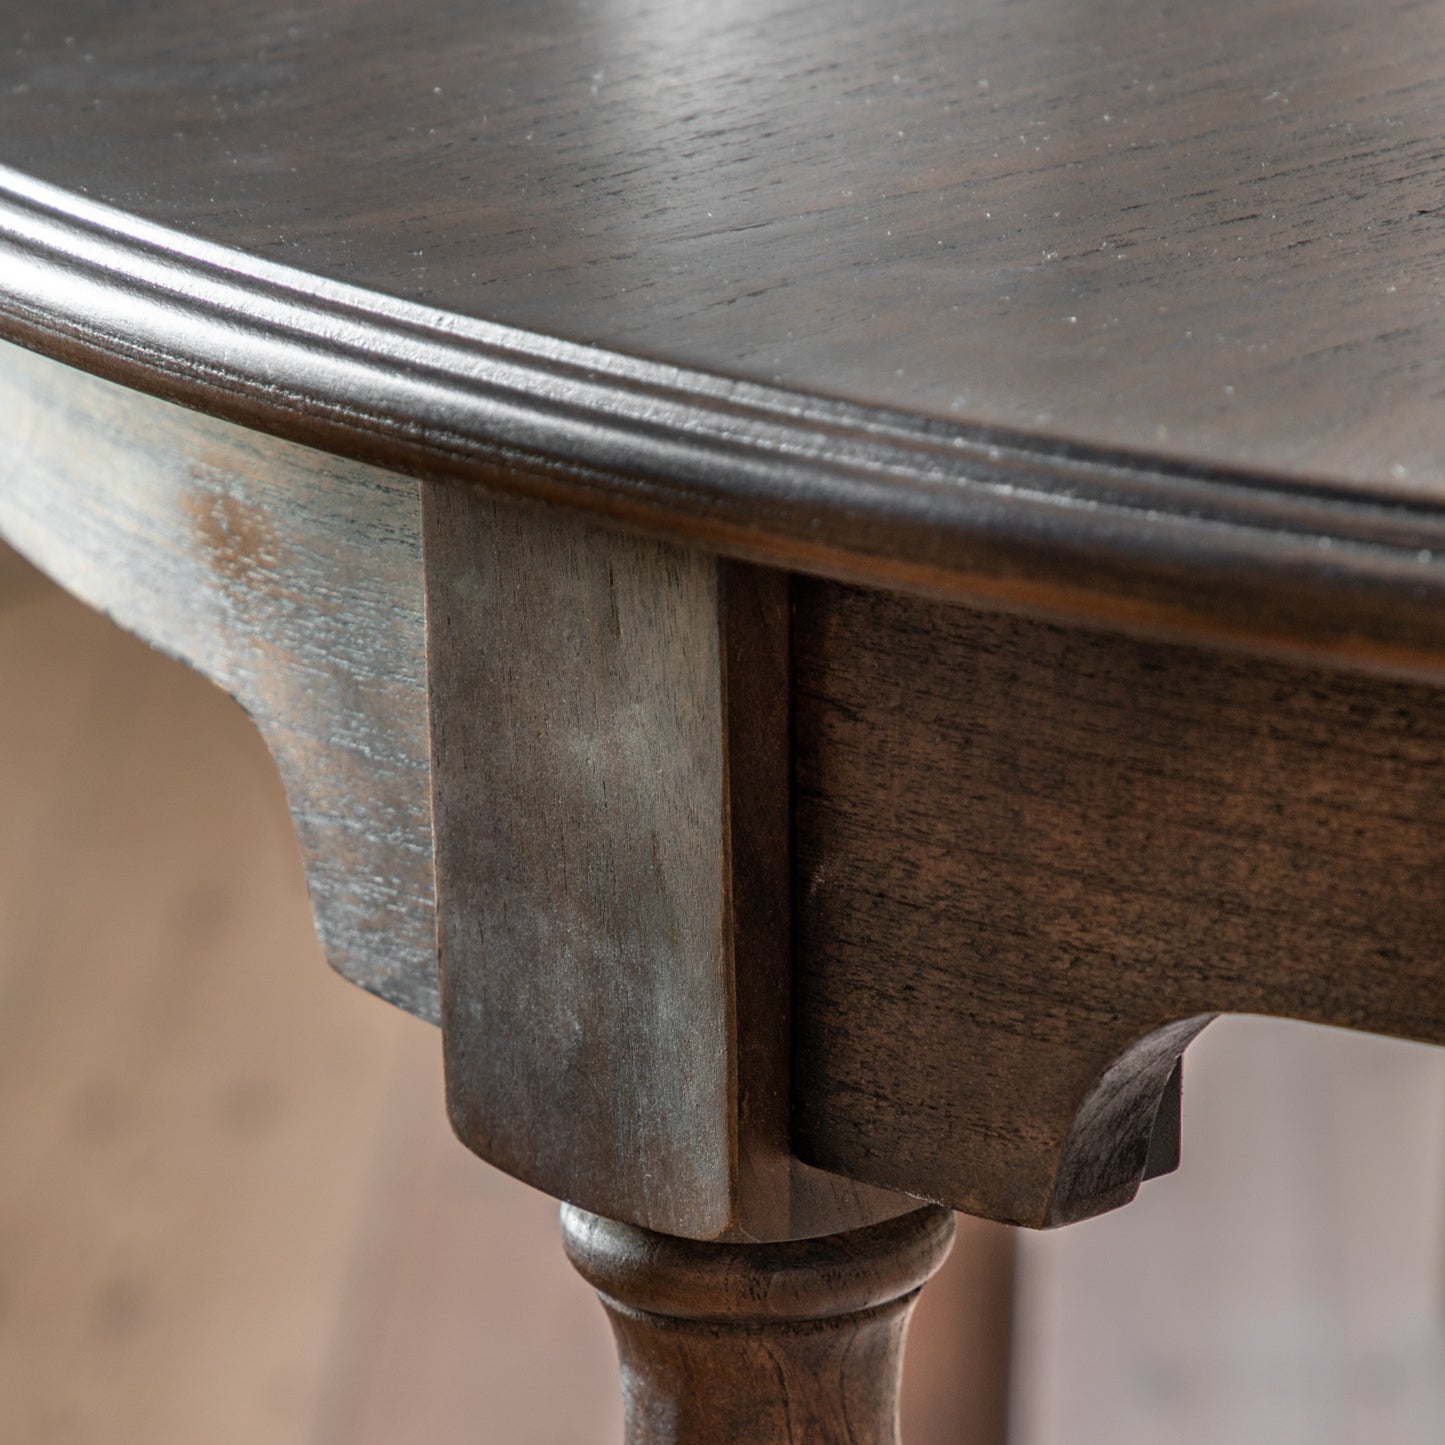 A close up of Kikiathome.co.uk's Manaton Extending Round Table, a home furniture piece perfect for interior decor.